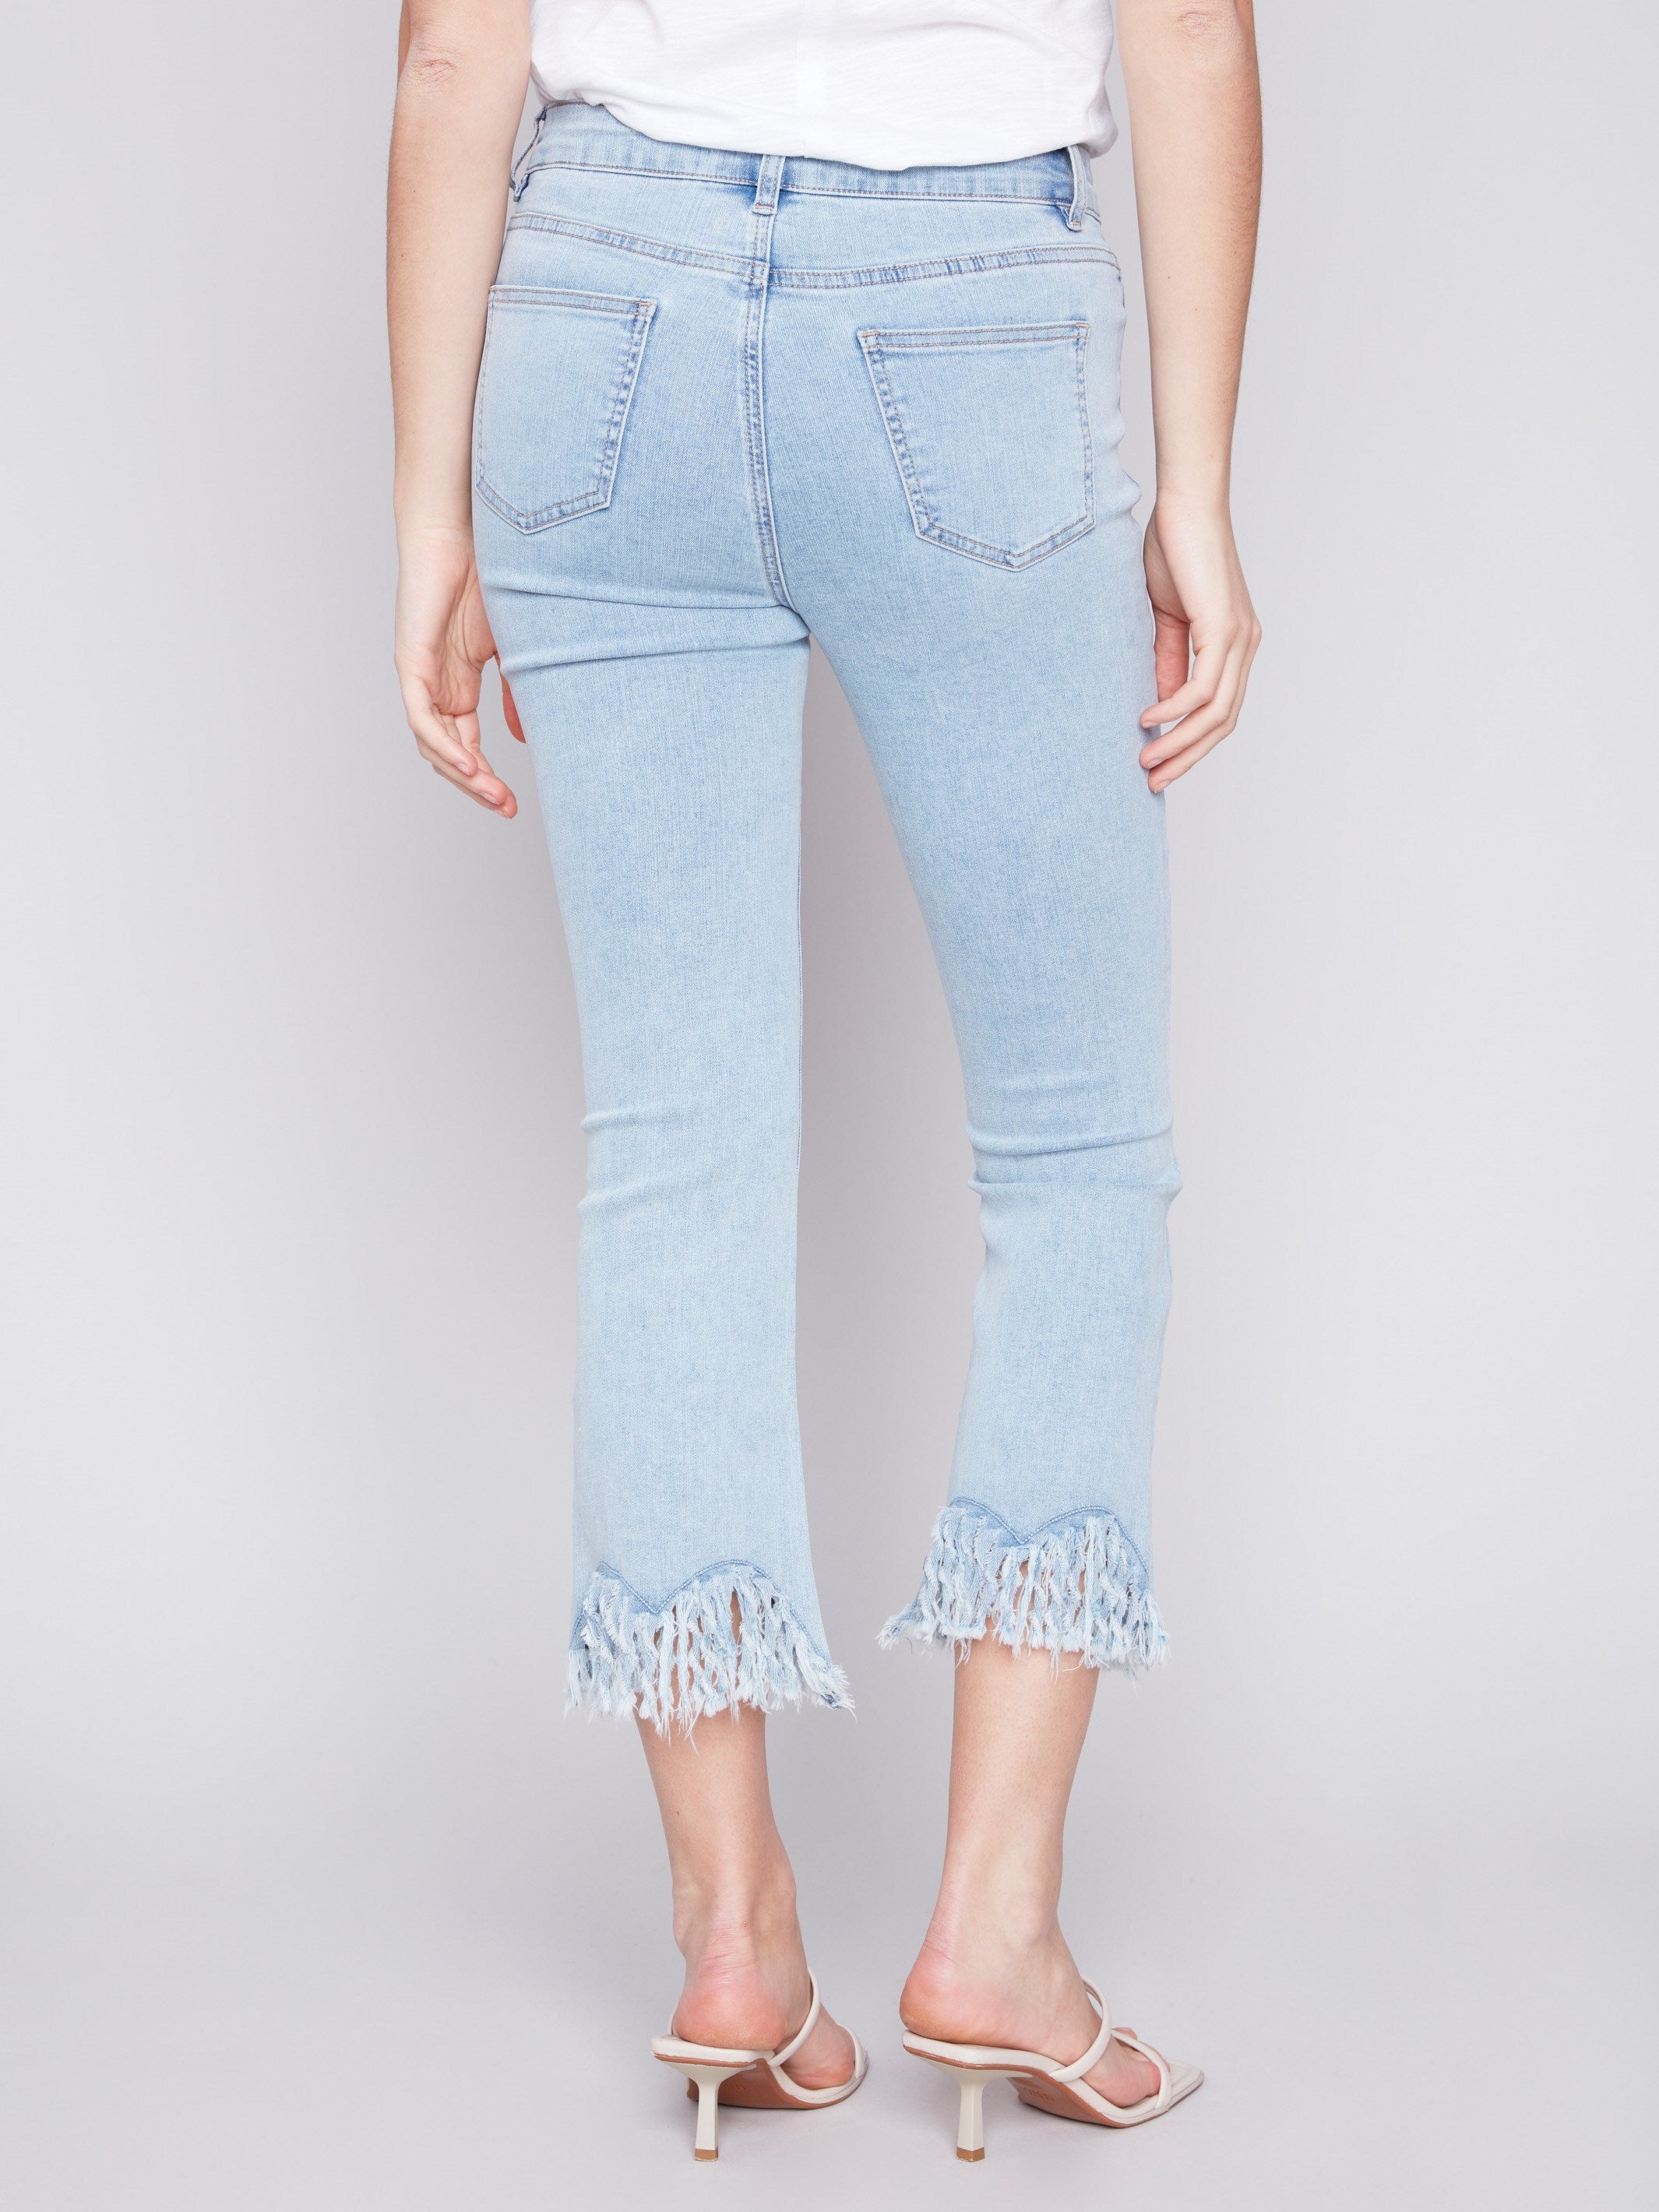 Cropped Jeans with Fringed Hem - Bleach Blue - Charlie B Collection Canada - Image 3